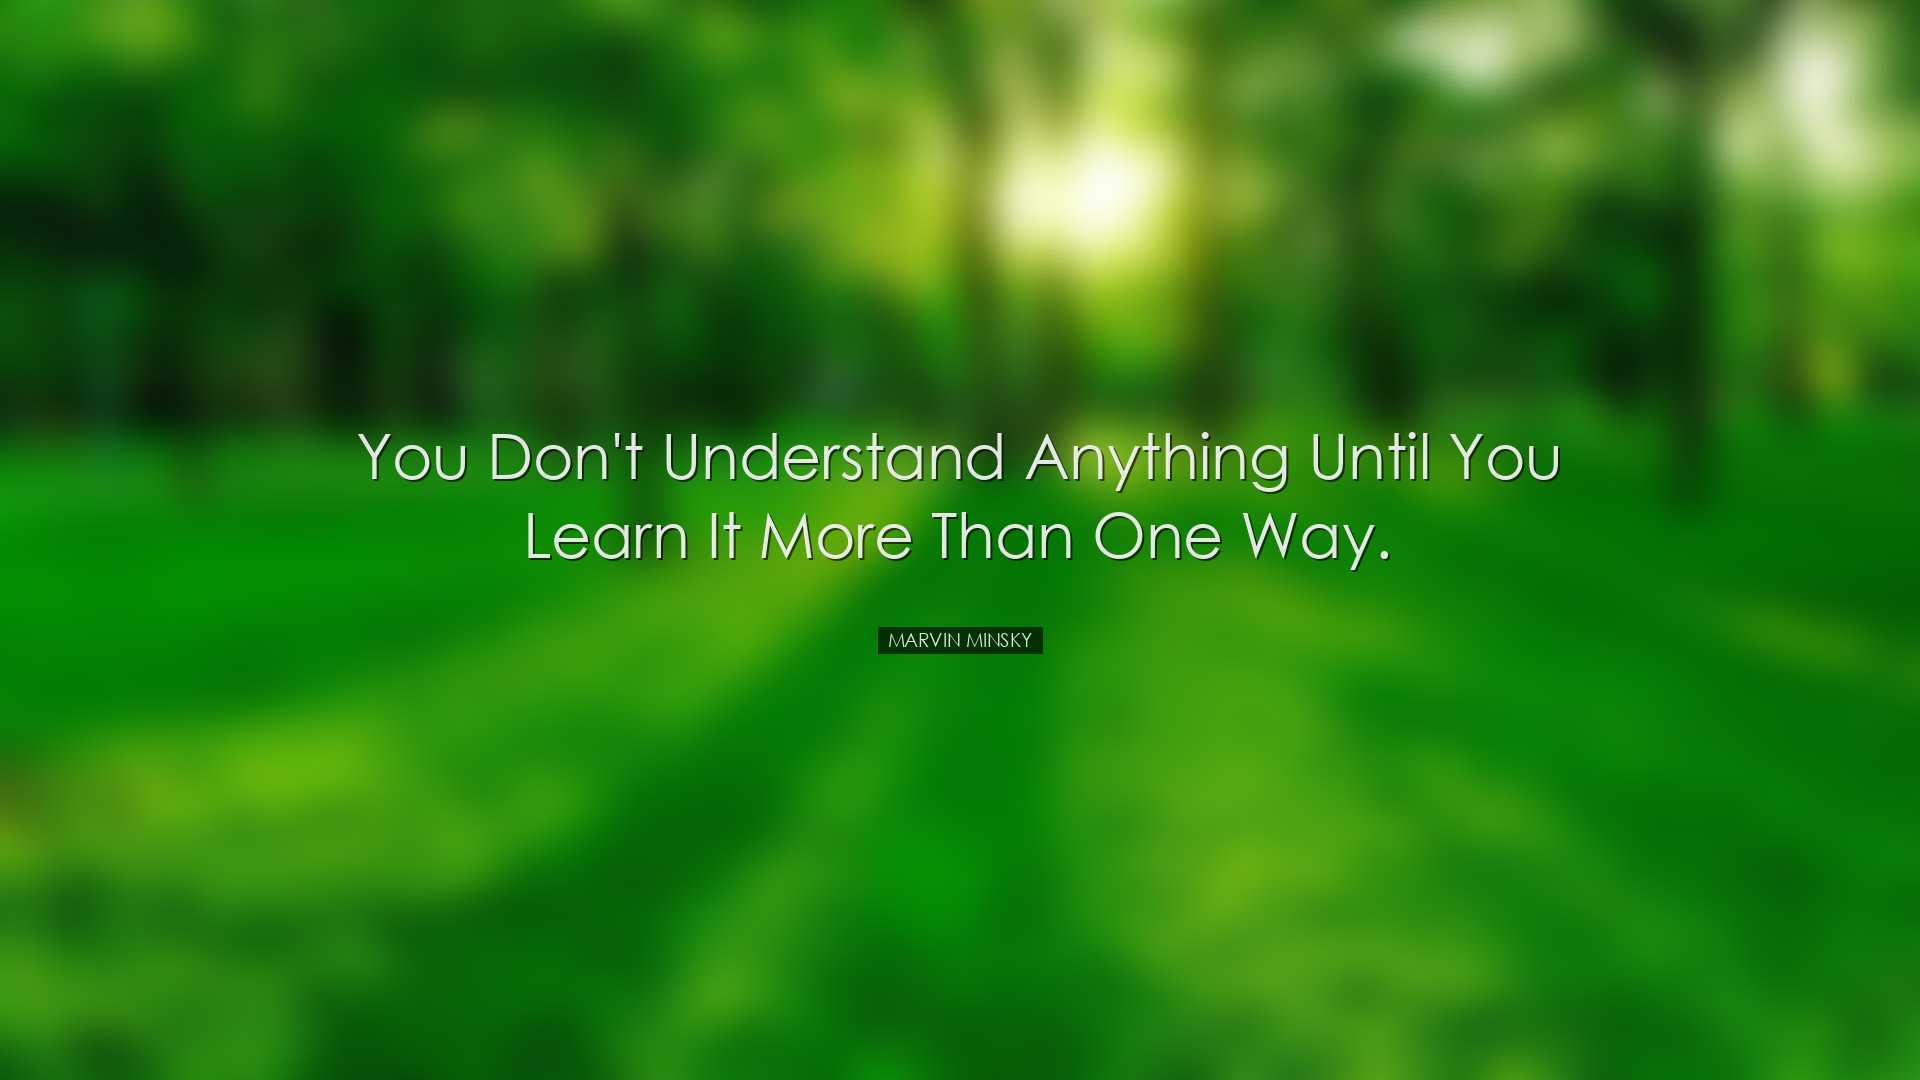 You don't understand anything until you learn it more than one way